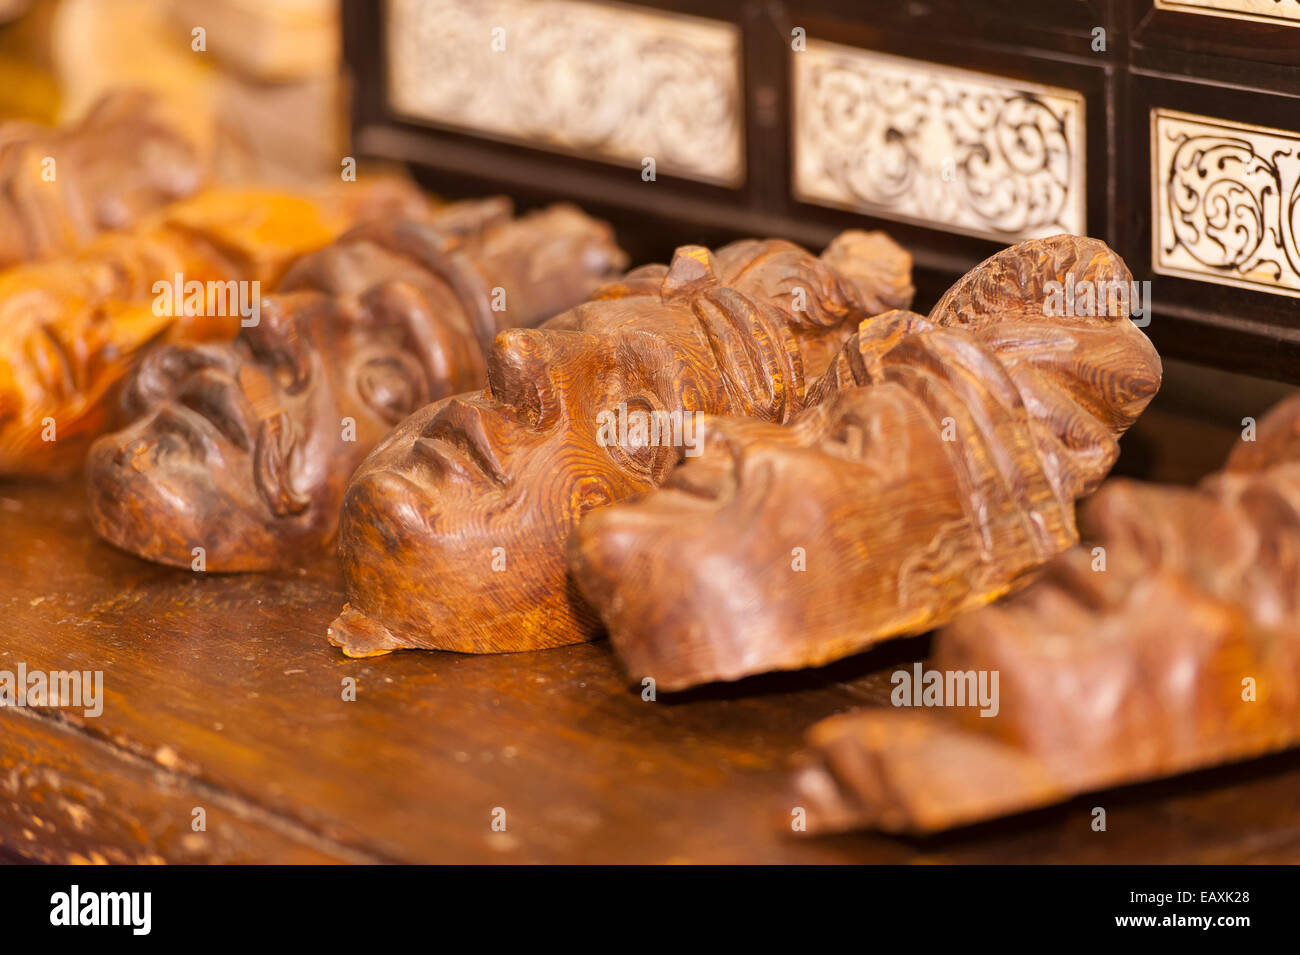 Madrid, Spain. 20th Nov, 2014. Detail of vintage wooden masks, Feriarte art and antiques Fair, 38th edition from November 15th to 23th 2014, Ifema fair center, Madrid, Spain. Credit:  Emanuele Ciccomartino/Alamy Live News Stock Photo